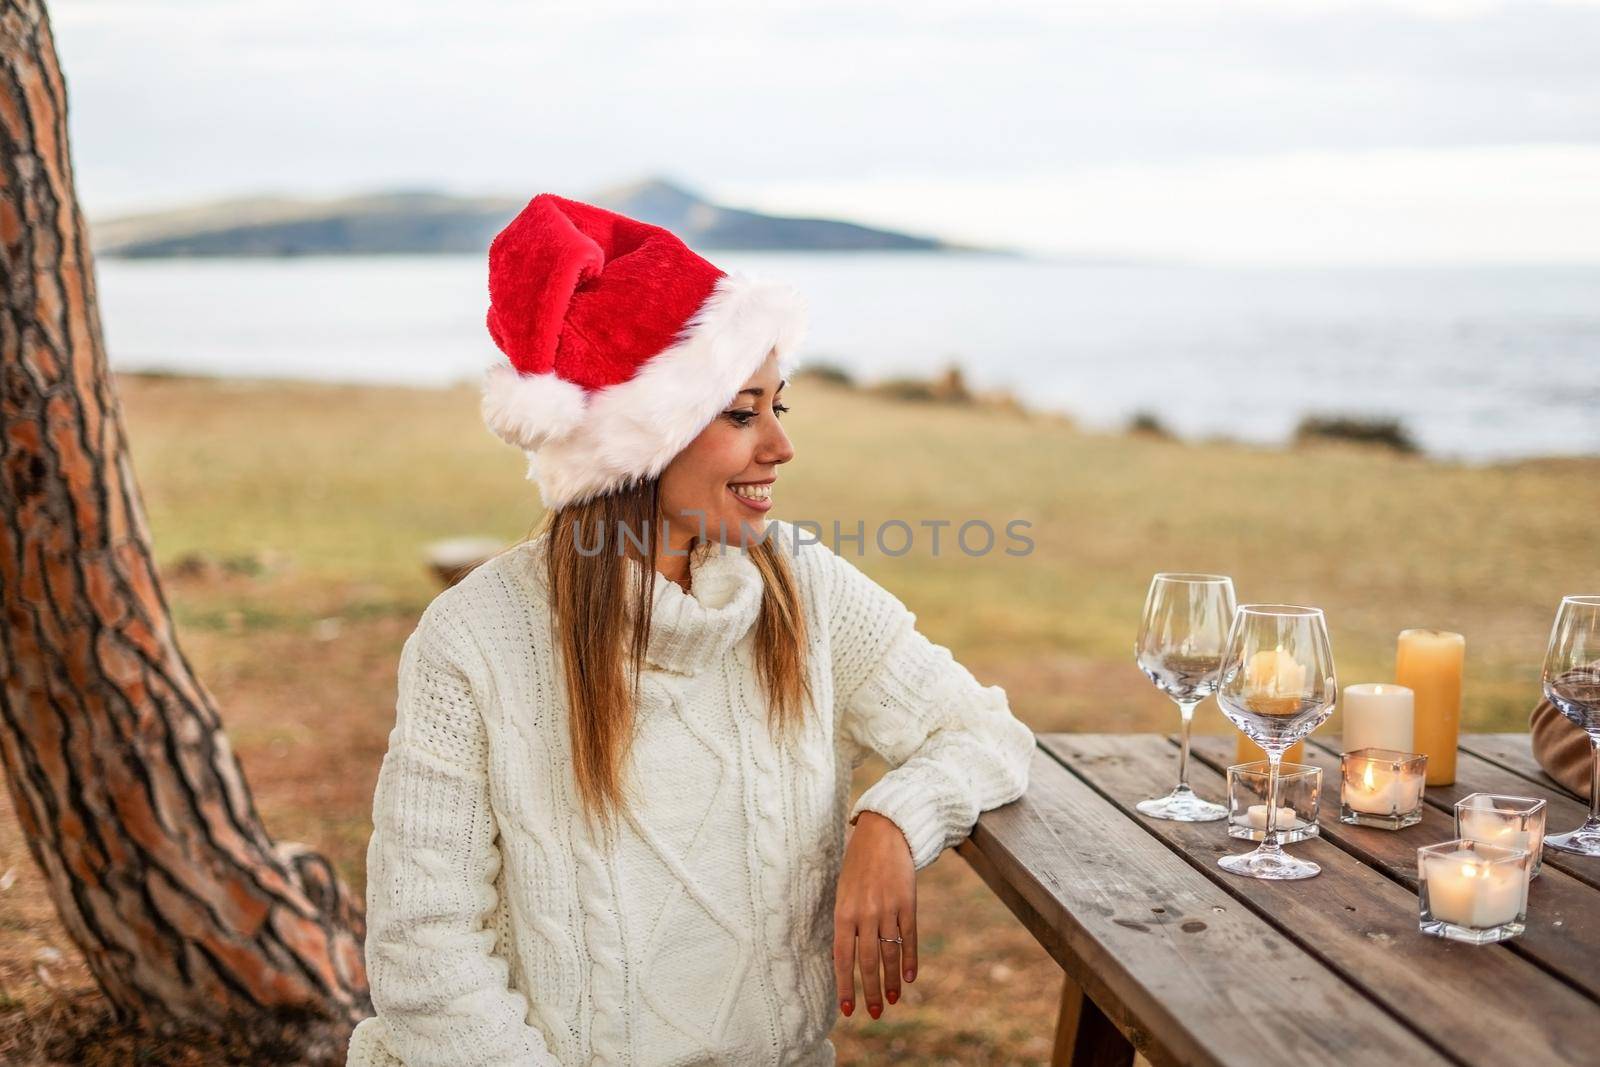 Beautiful young woman smiling sitting outdoor at a wooden table posing with Santa Klaus hat and white wool sweater watching empty glasses before toast for celebrating holidays in sea winter vacation